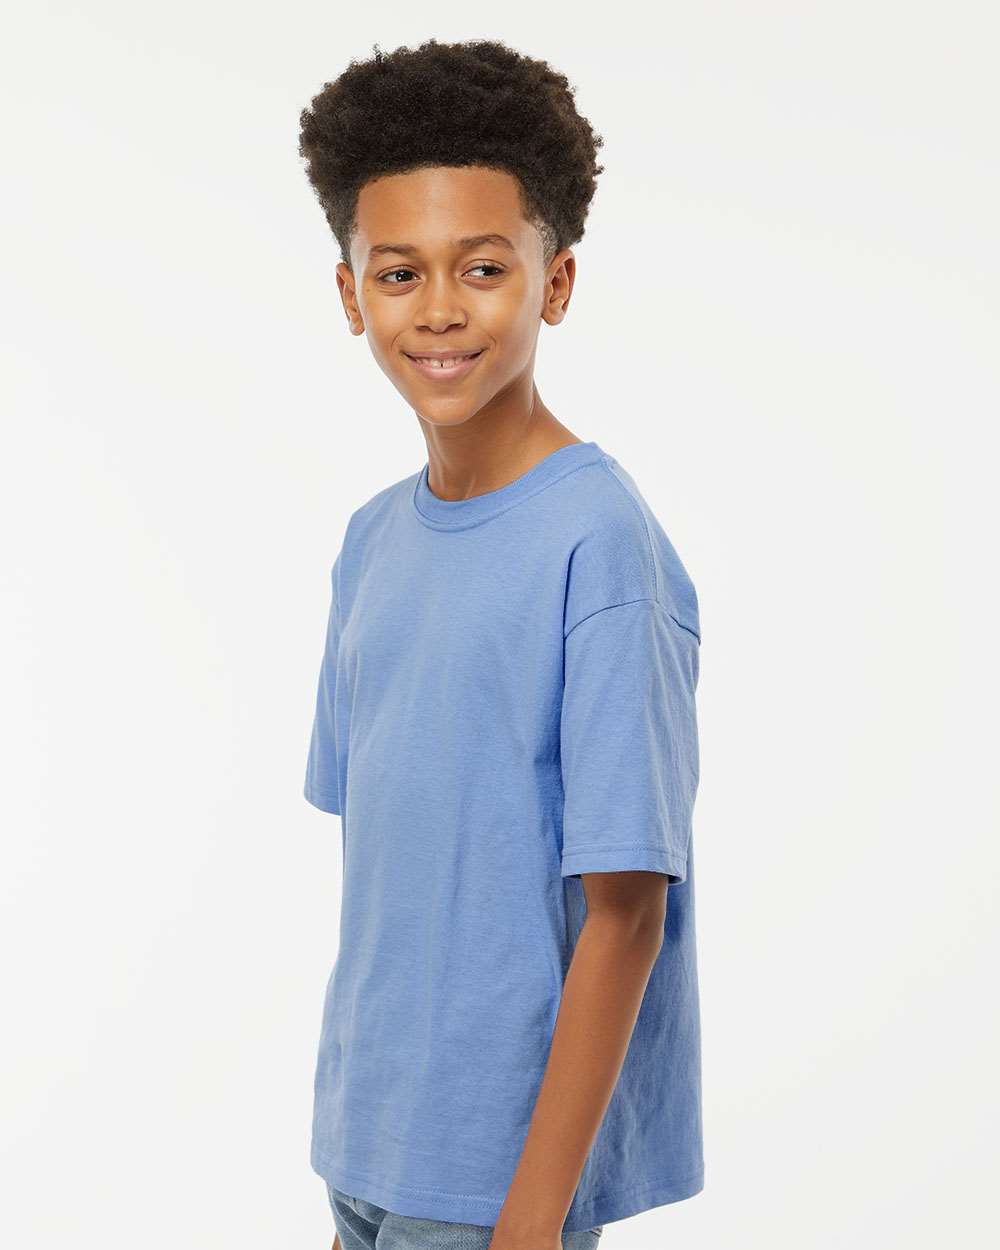 M&O Youth Deluxe Blend T-Shirt 3544 - Northernblanks Inc.